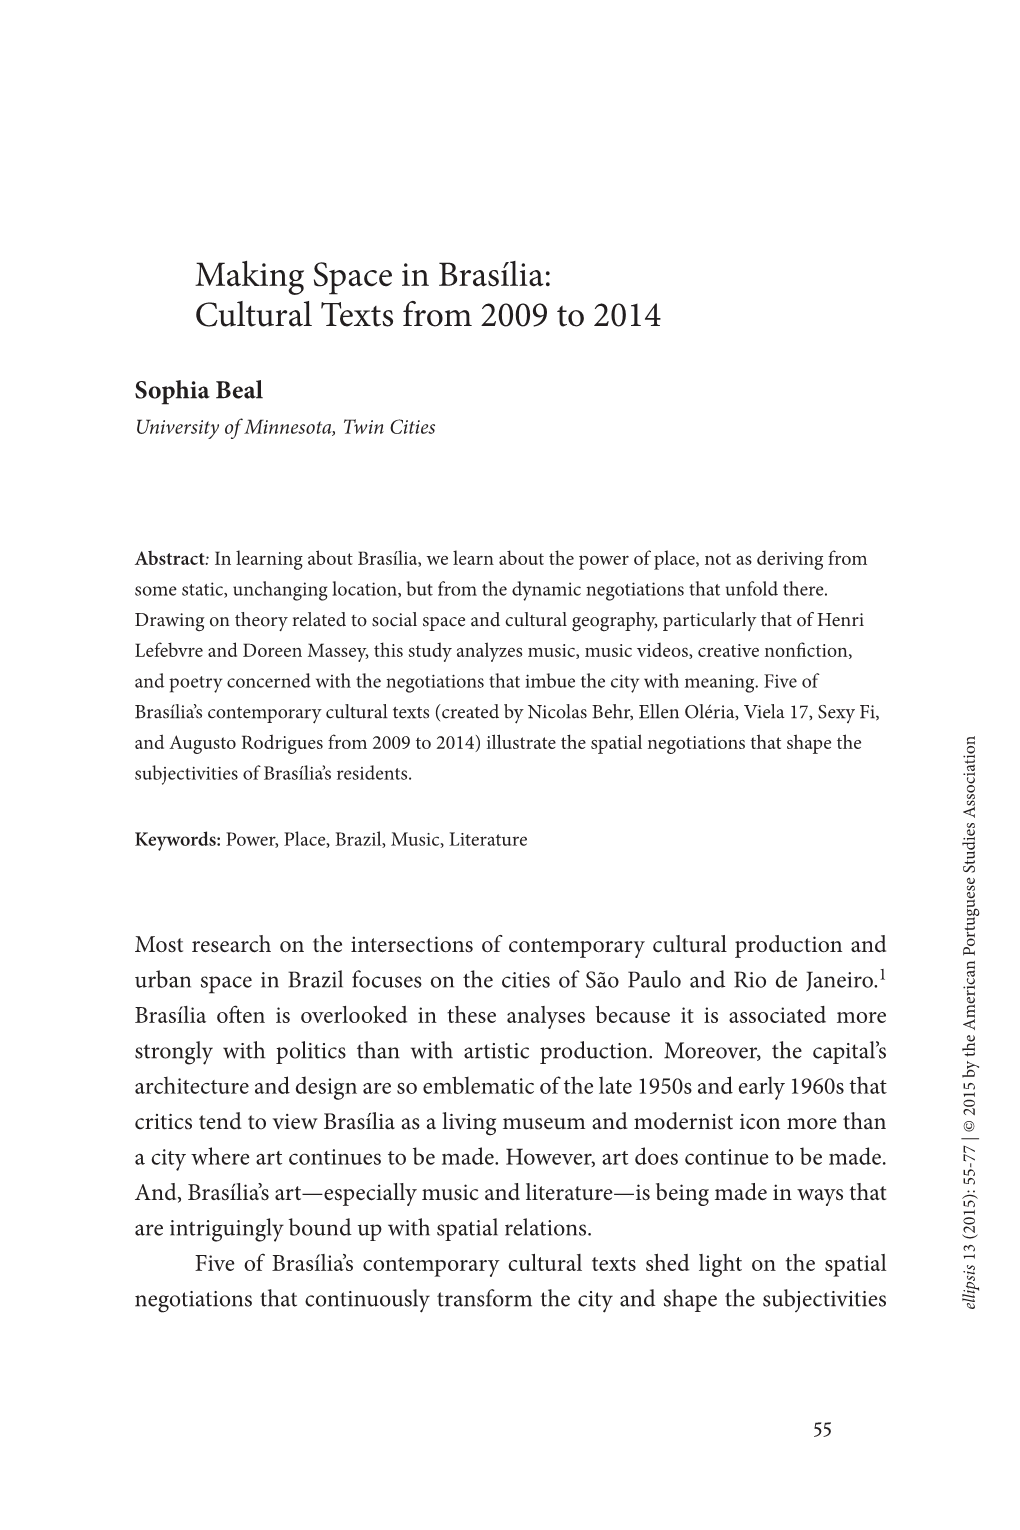 Making Space in Brasília: Cultural Texts from 2009 to 2014